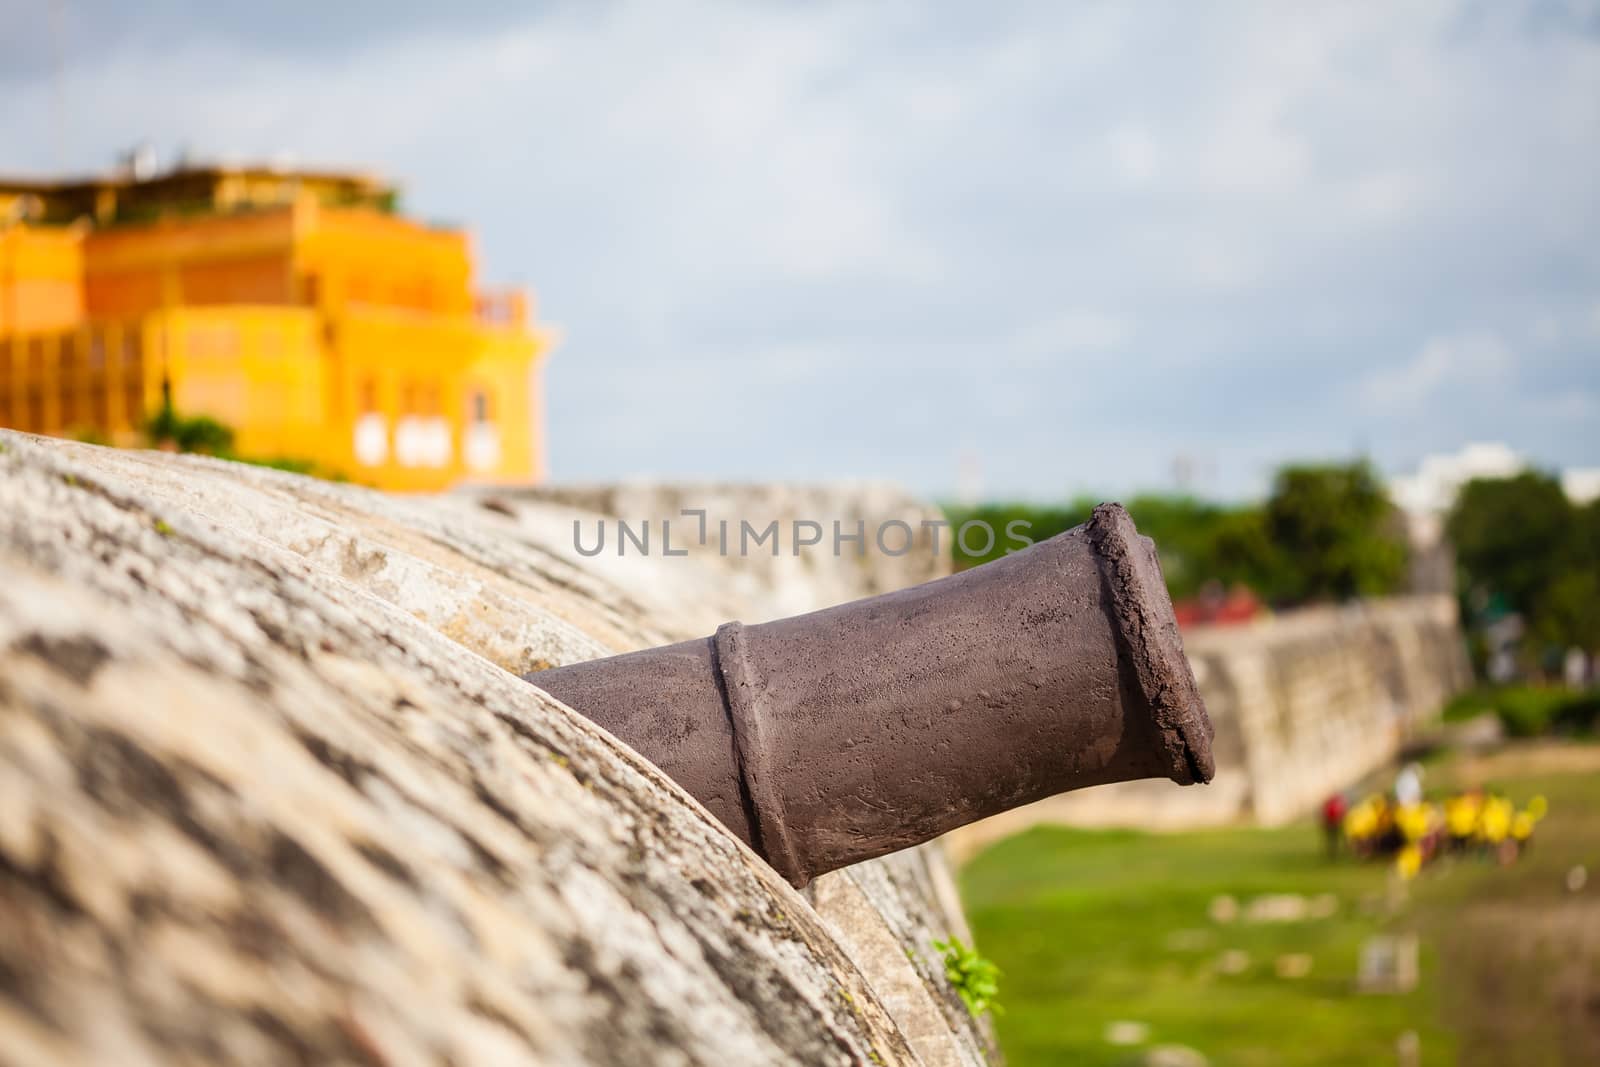 Cannon of Cartagena's wall